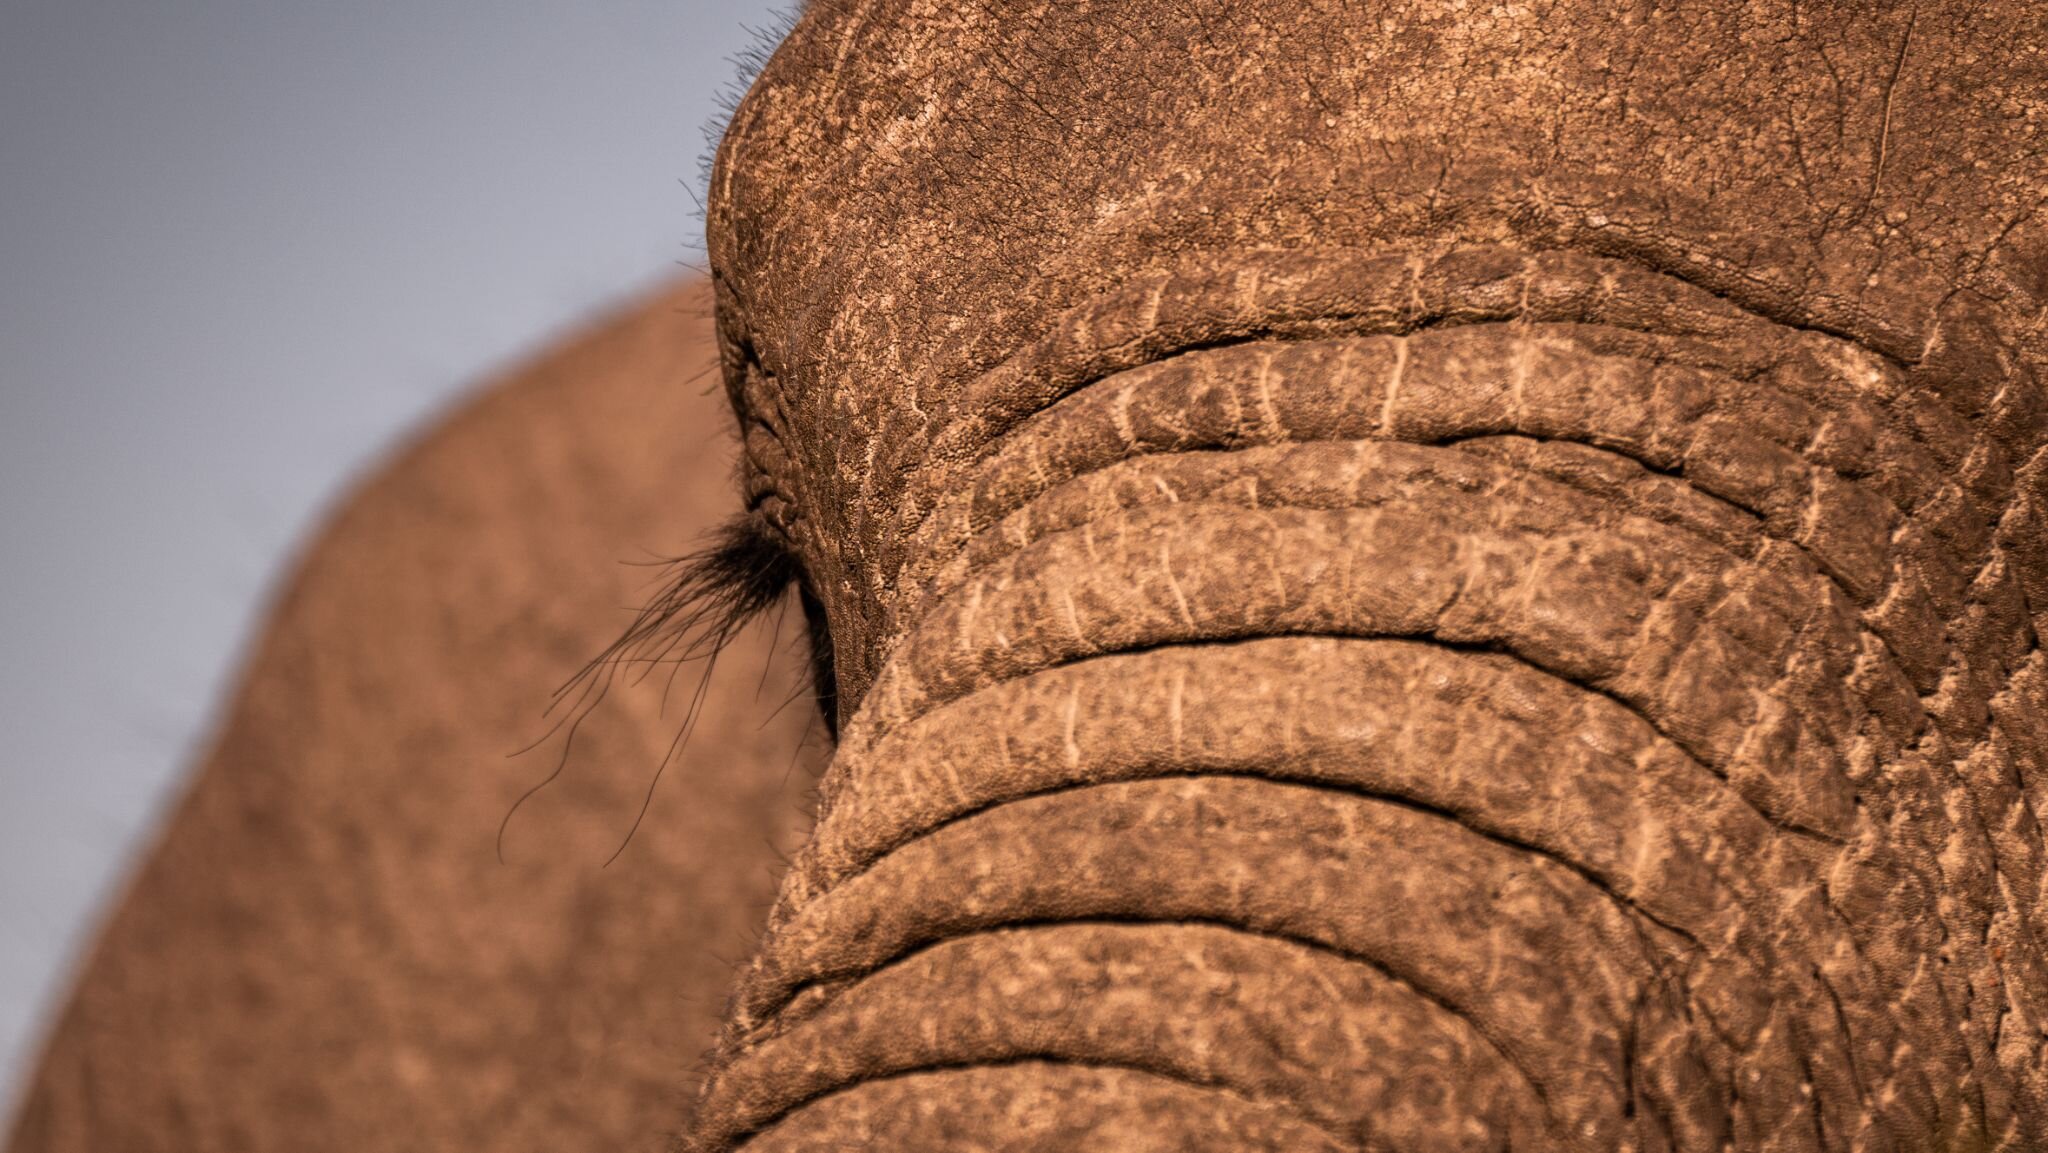 Long Lashes 🐘

Elephant's eyelashes protect their eyes from dust, sand, and debris in the harsh environments they inhabit.

📷 @gondwanagr @roy_roysky
#mywyldlife #mywyldlifeofficial #bewyld #animalsofinstagram #roy_roysky #gondwanagr #gondwanaconse